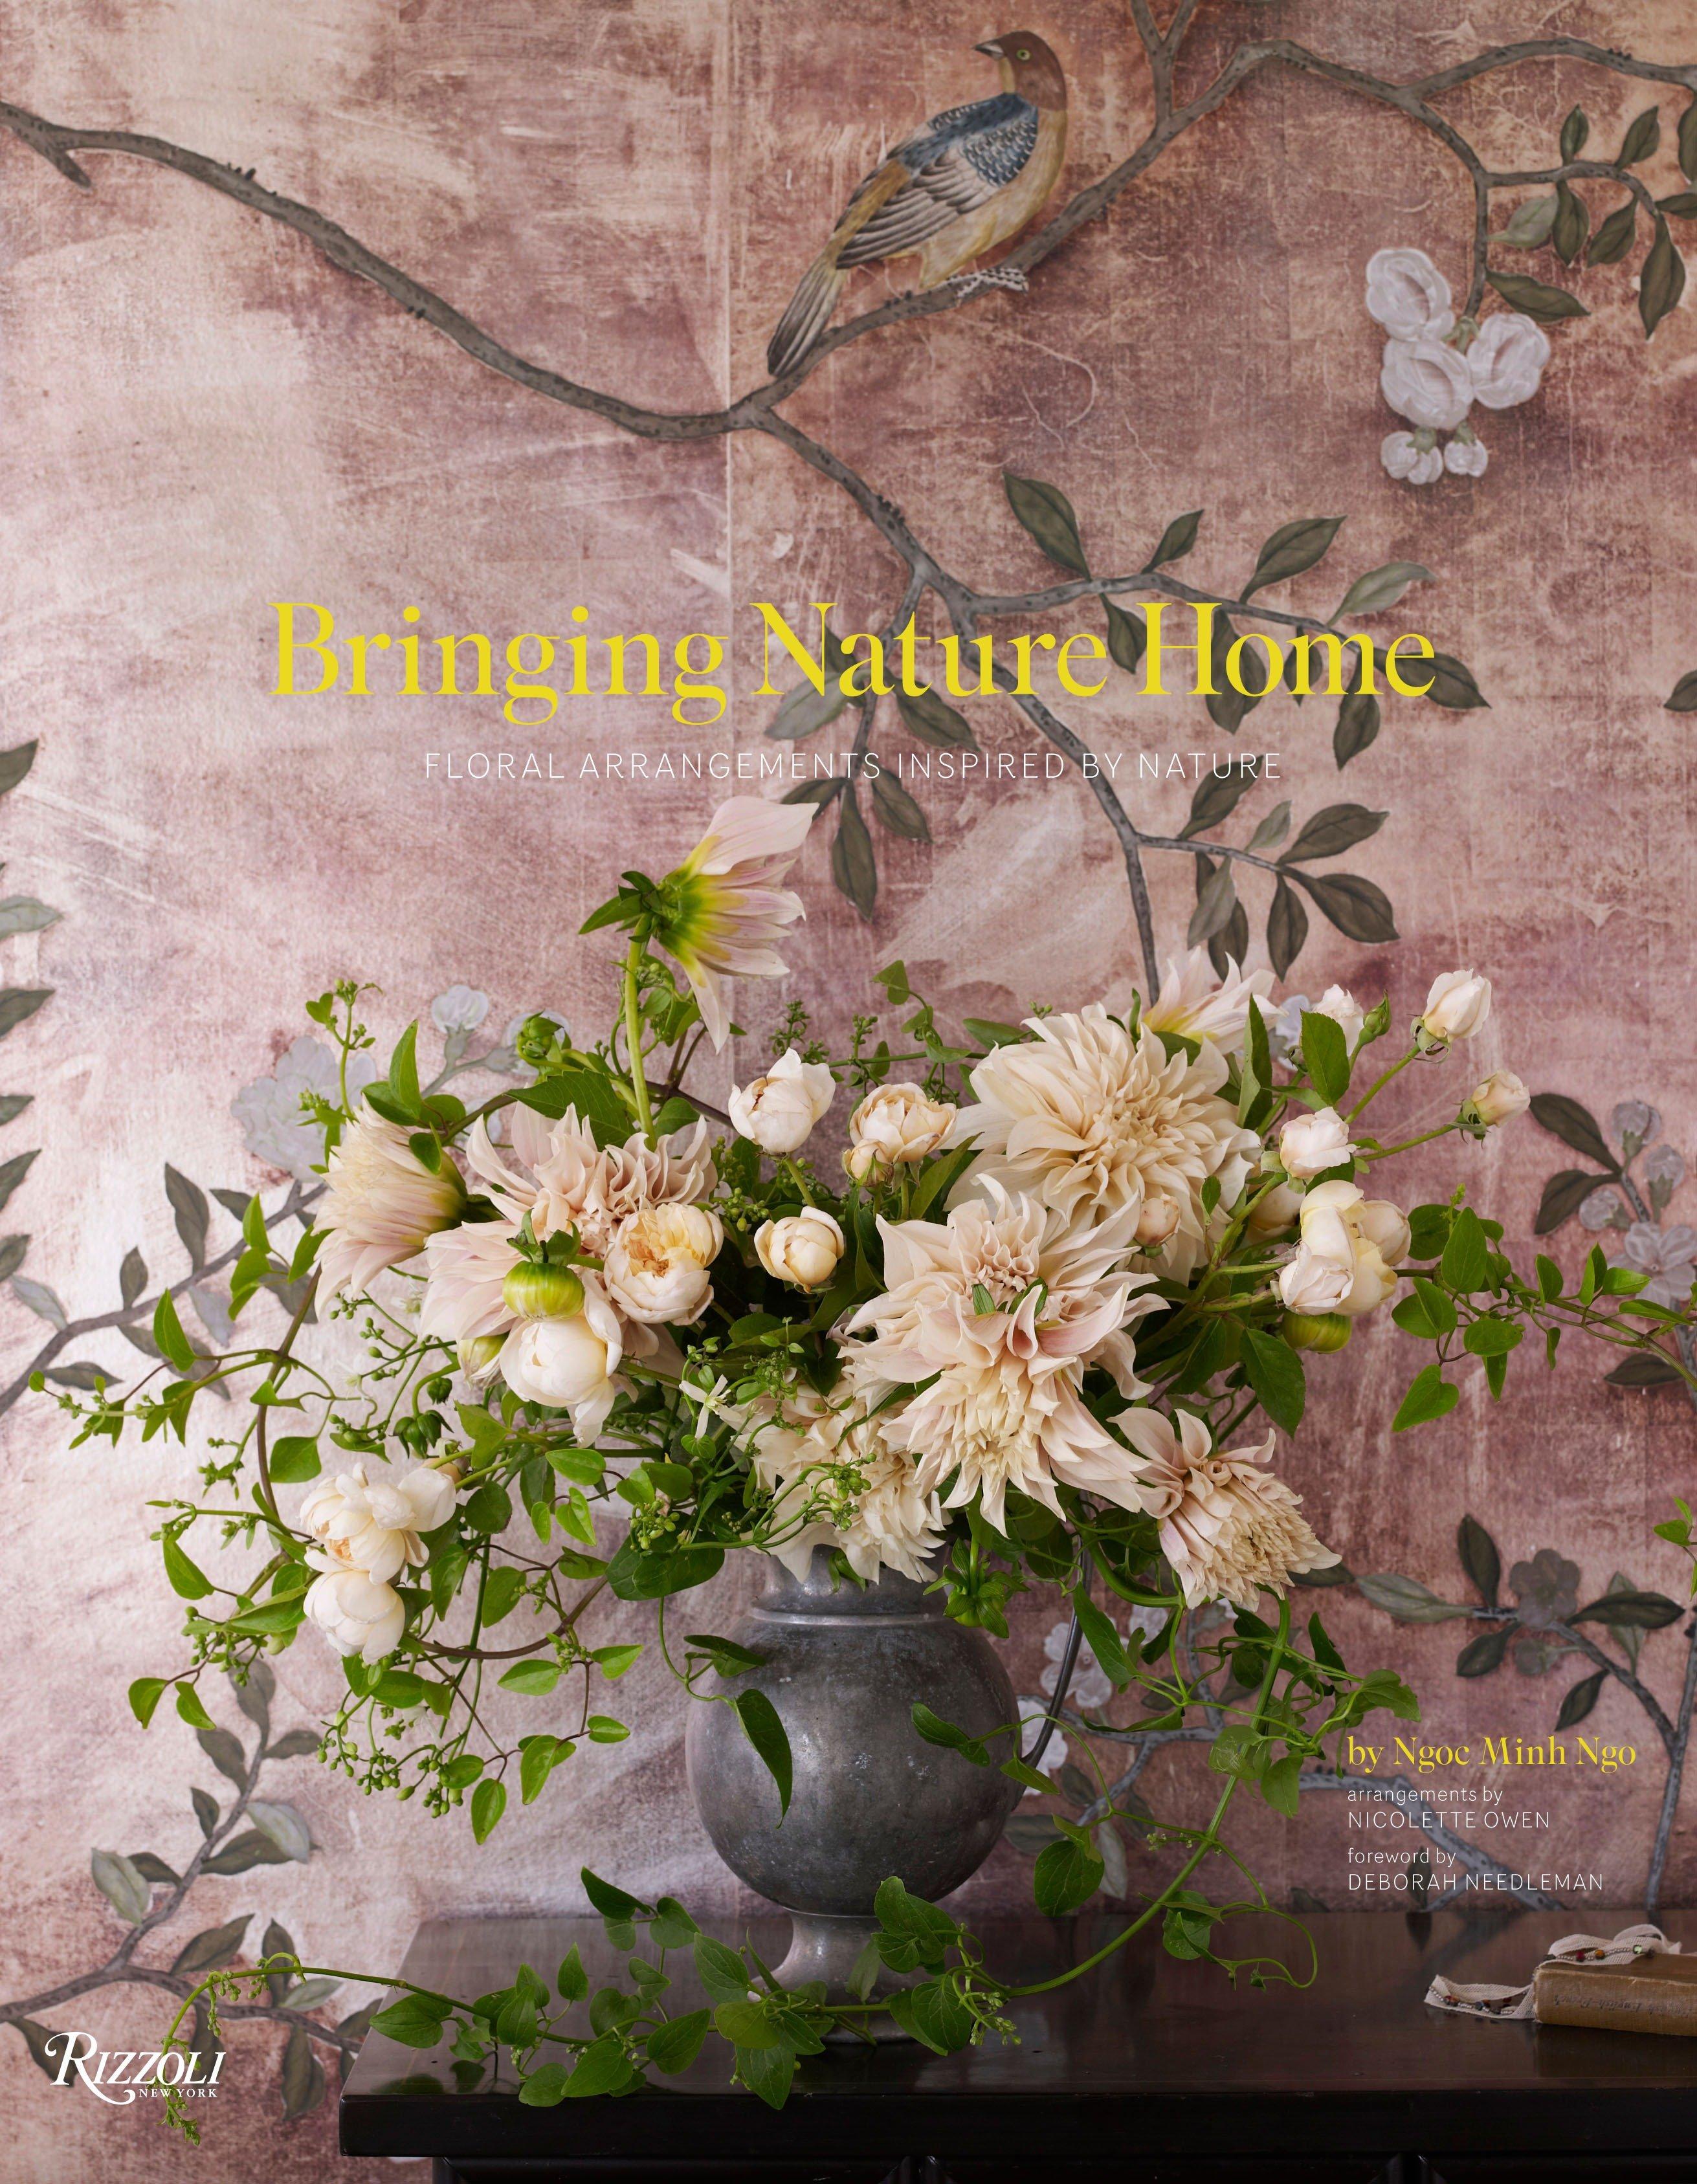 Bringing Nature Home: Floral Arrangements Inspired by Nature / Ngoc Minh Ngo / Buch / Englisch / 2015 / UNIVERSE BOOKS / EAN 9780847838004 - Ngo, Ngoc Minh